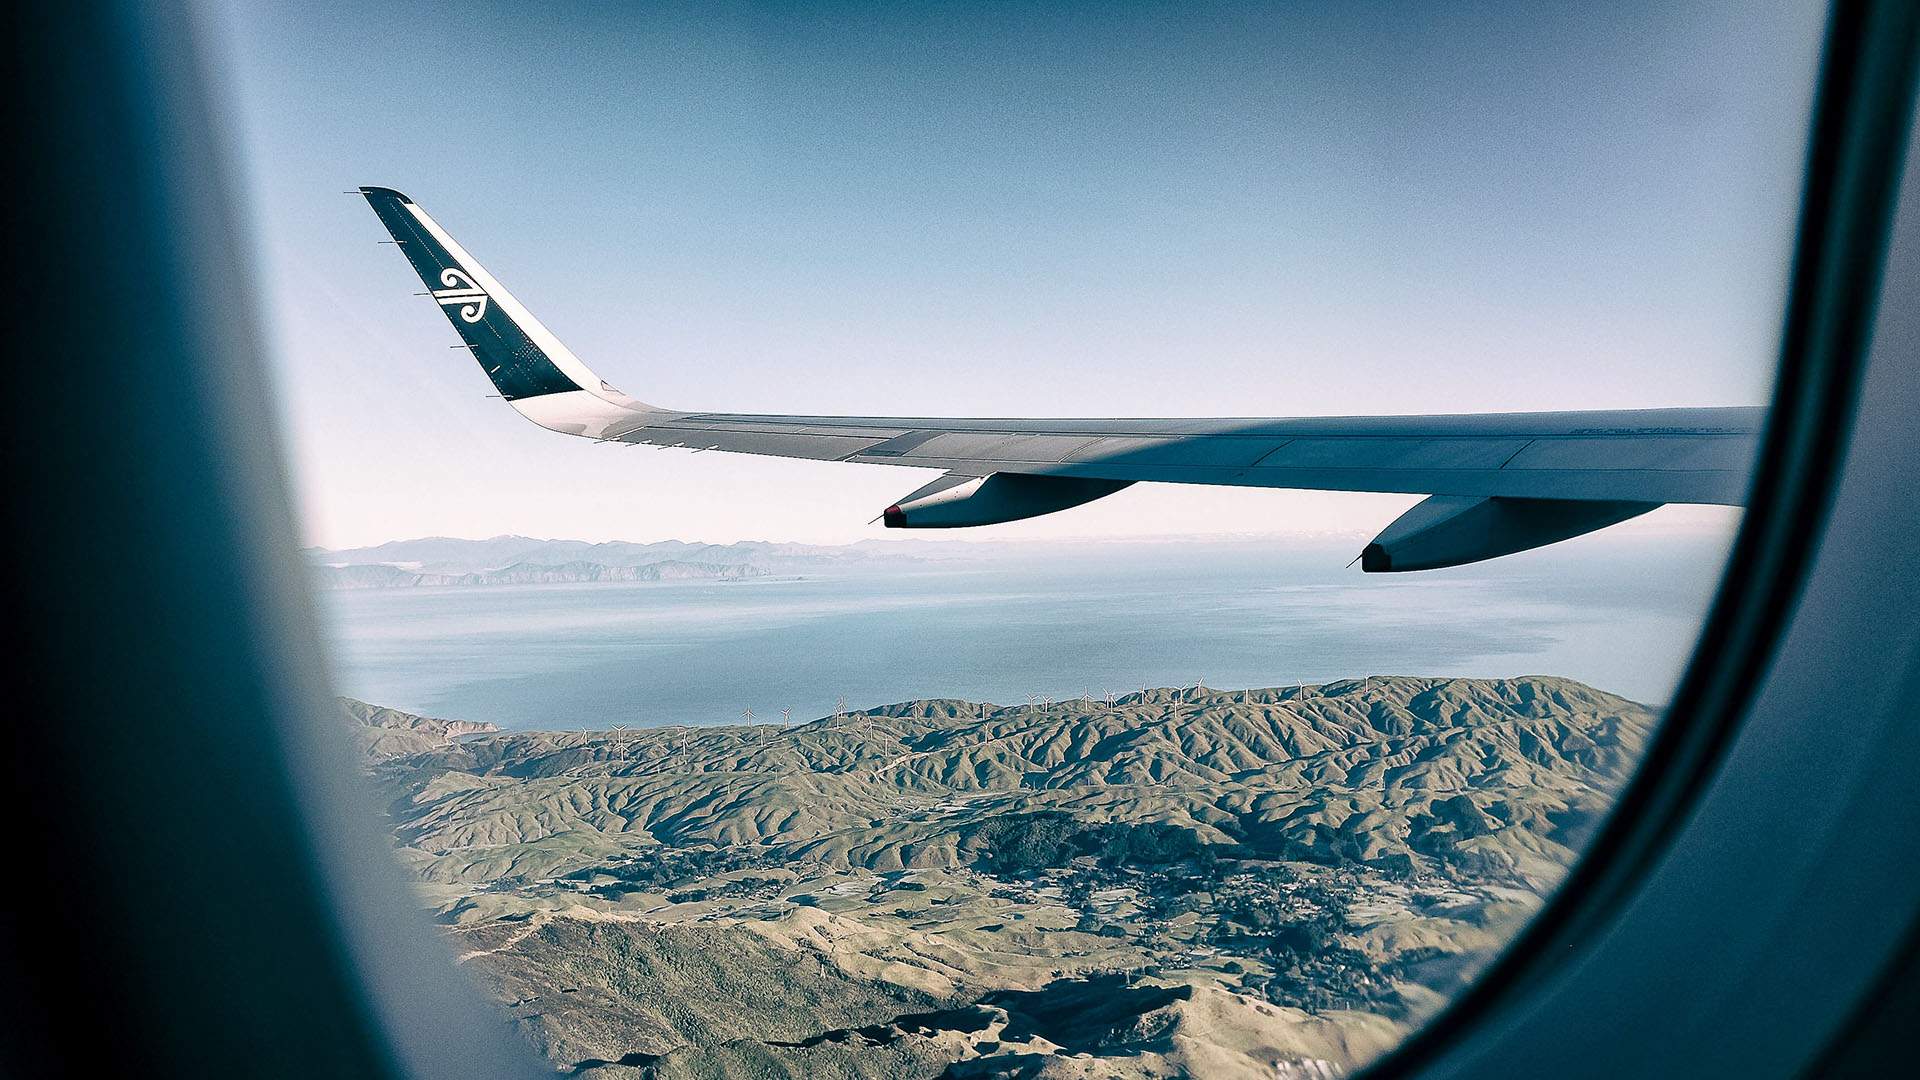 Just In: Air New Zealand Has Been Named the Airline of the Year for 2023